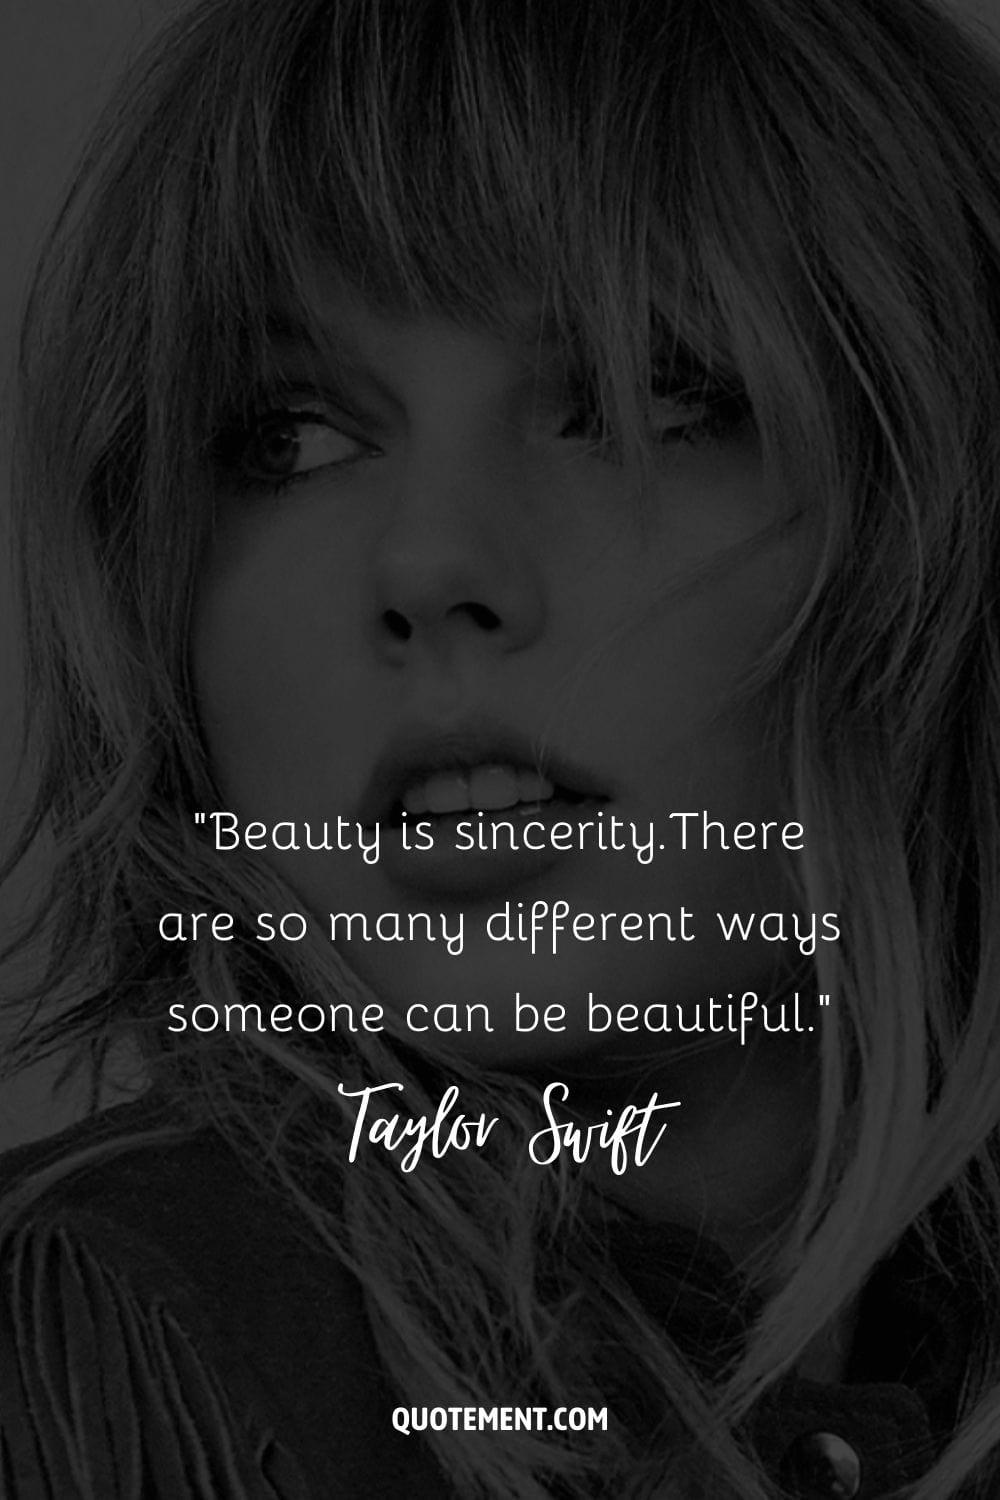 “Beauty is sincerity.There are so many different ways someone can be beautiful.” ― Taylor Swift